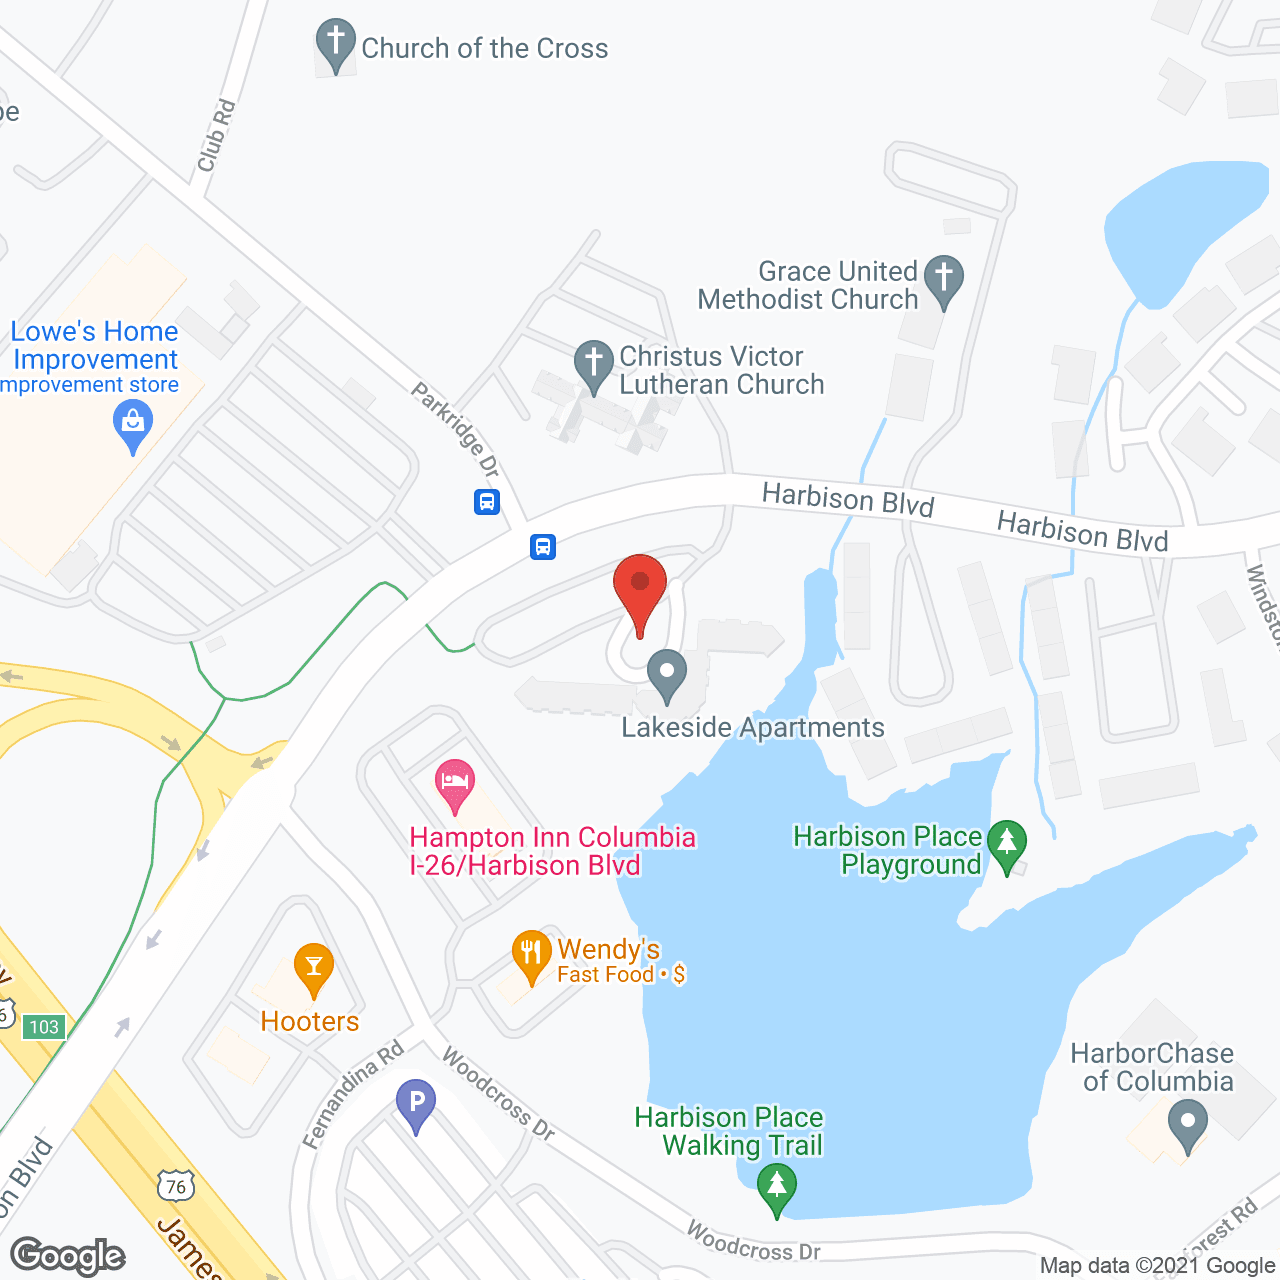 Lakeside Apartments in google map